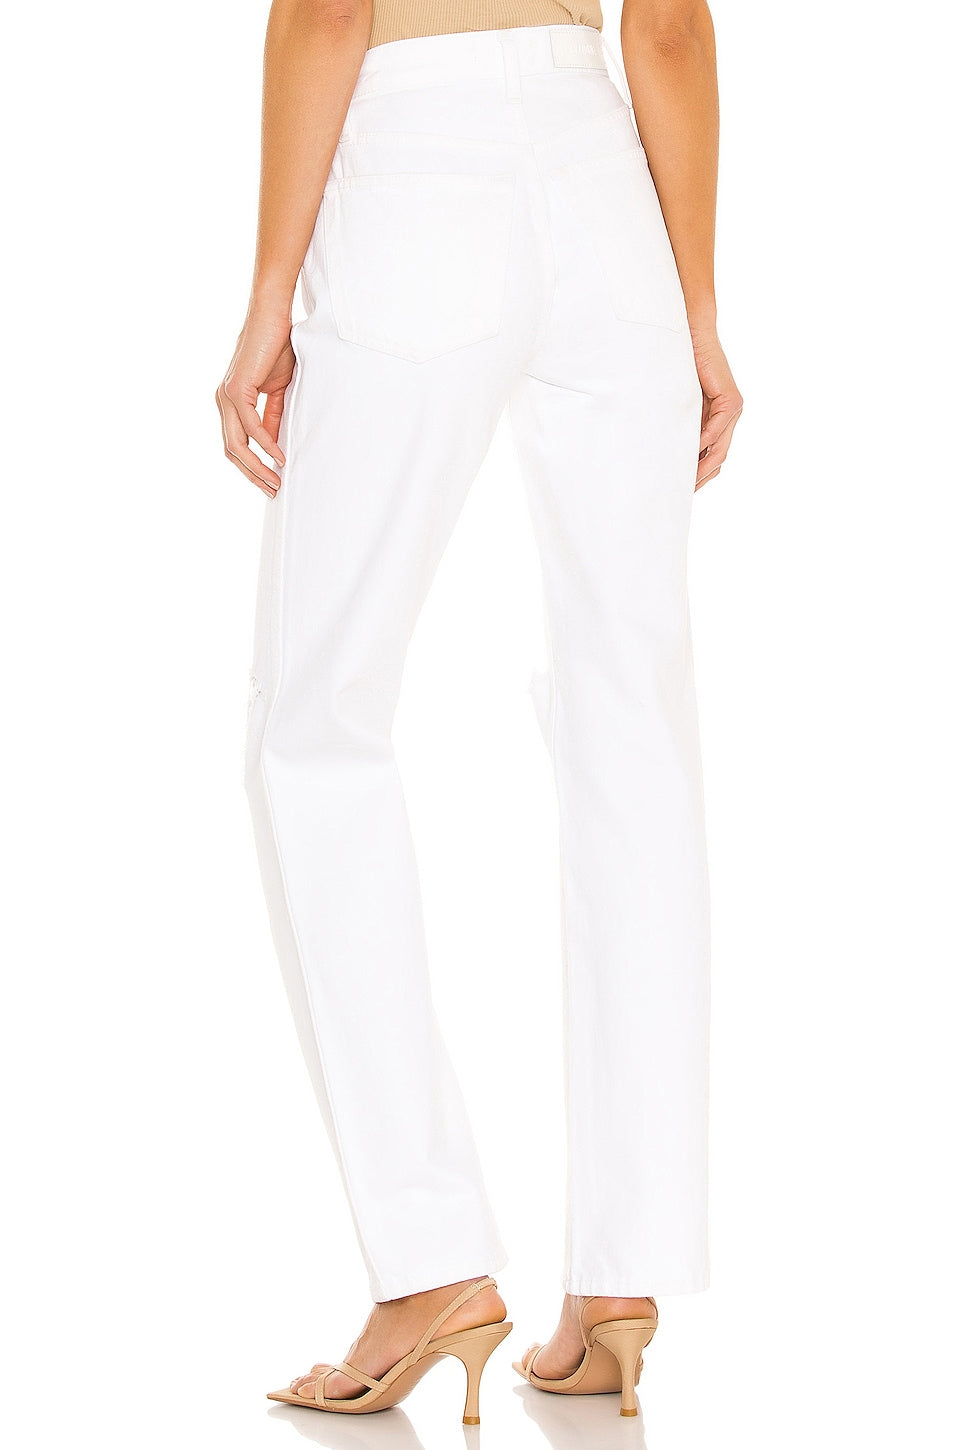 RE/DONE Originals 90s High Rise Loose in White With Rips SIZE 25